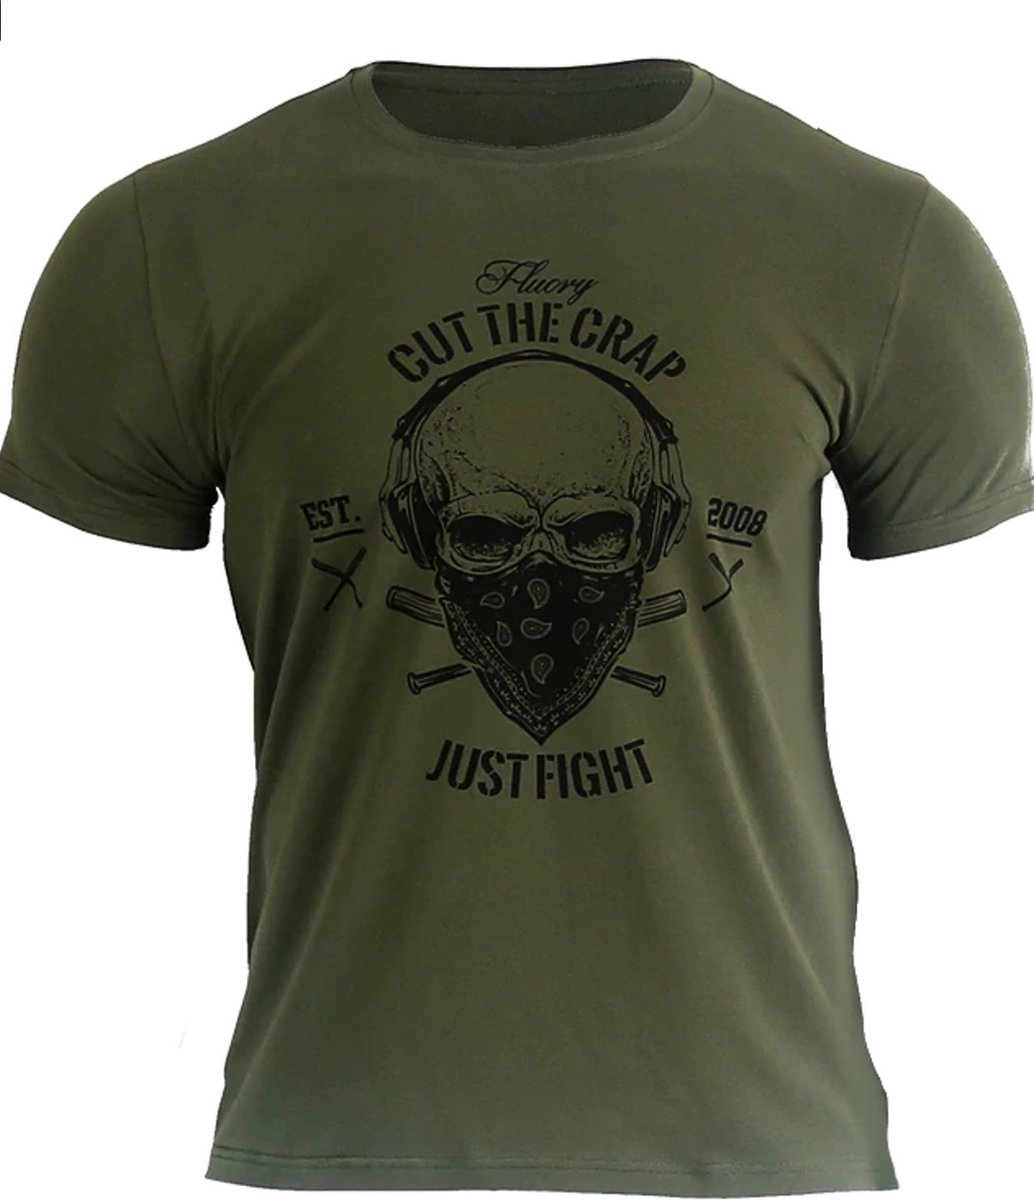 Fluory Cut the Crap Just Fight T-shirt Military Green maat S